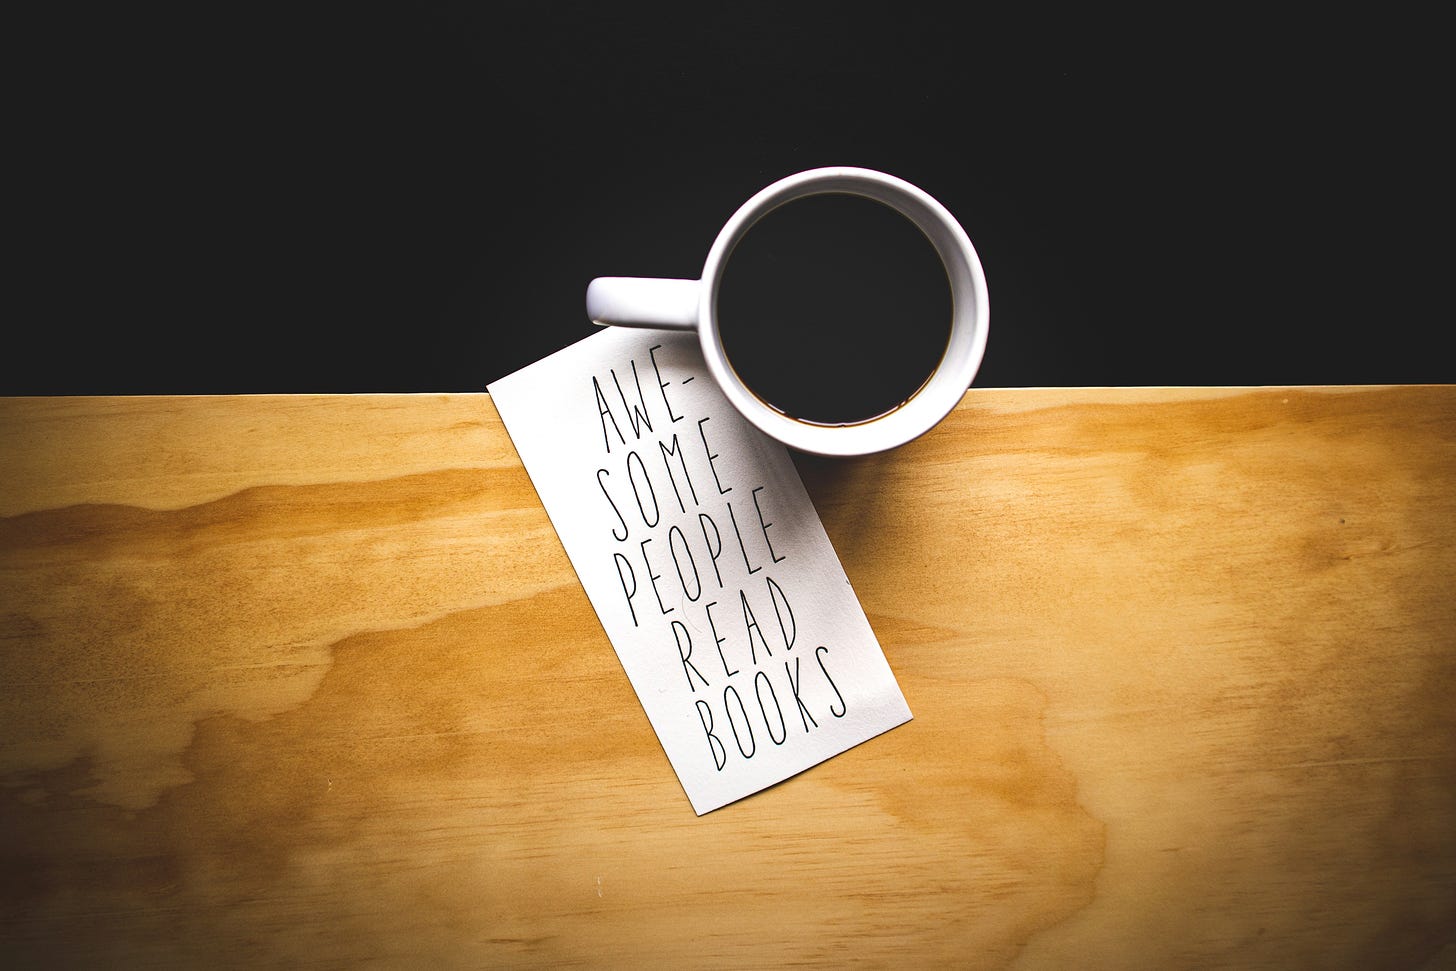 Image of a cup of coffee and a card that reads "awesome people read books"